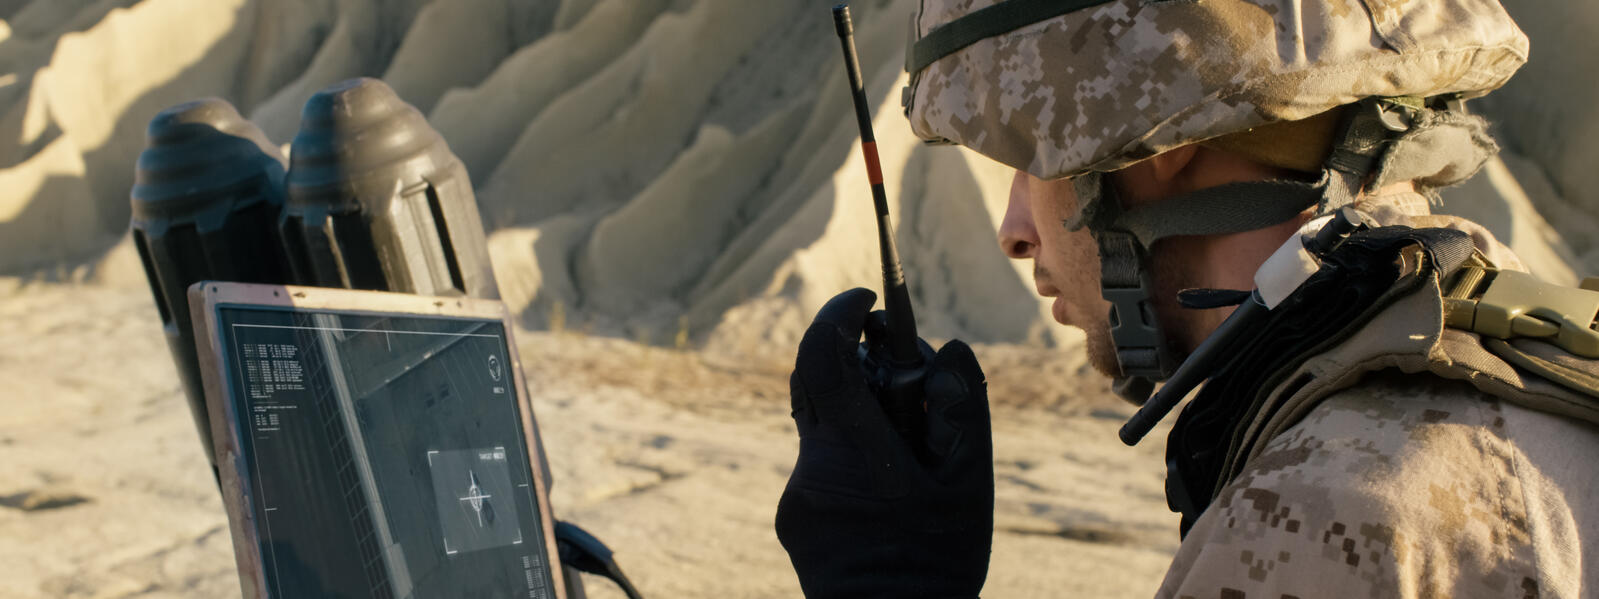 Military soldier viewing video feed on laptop monitor.